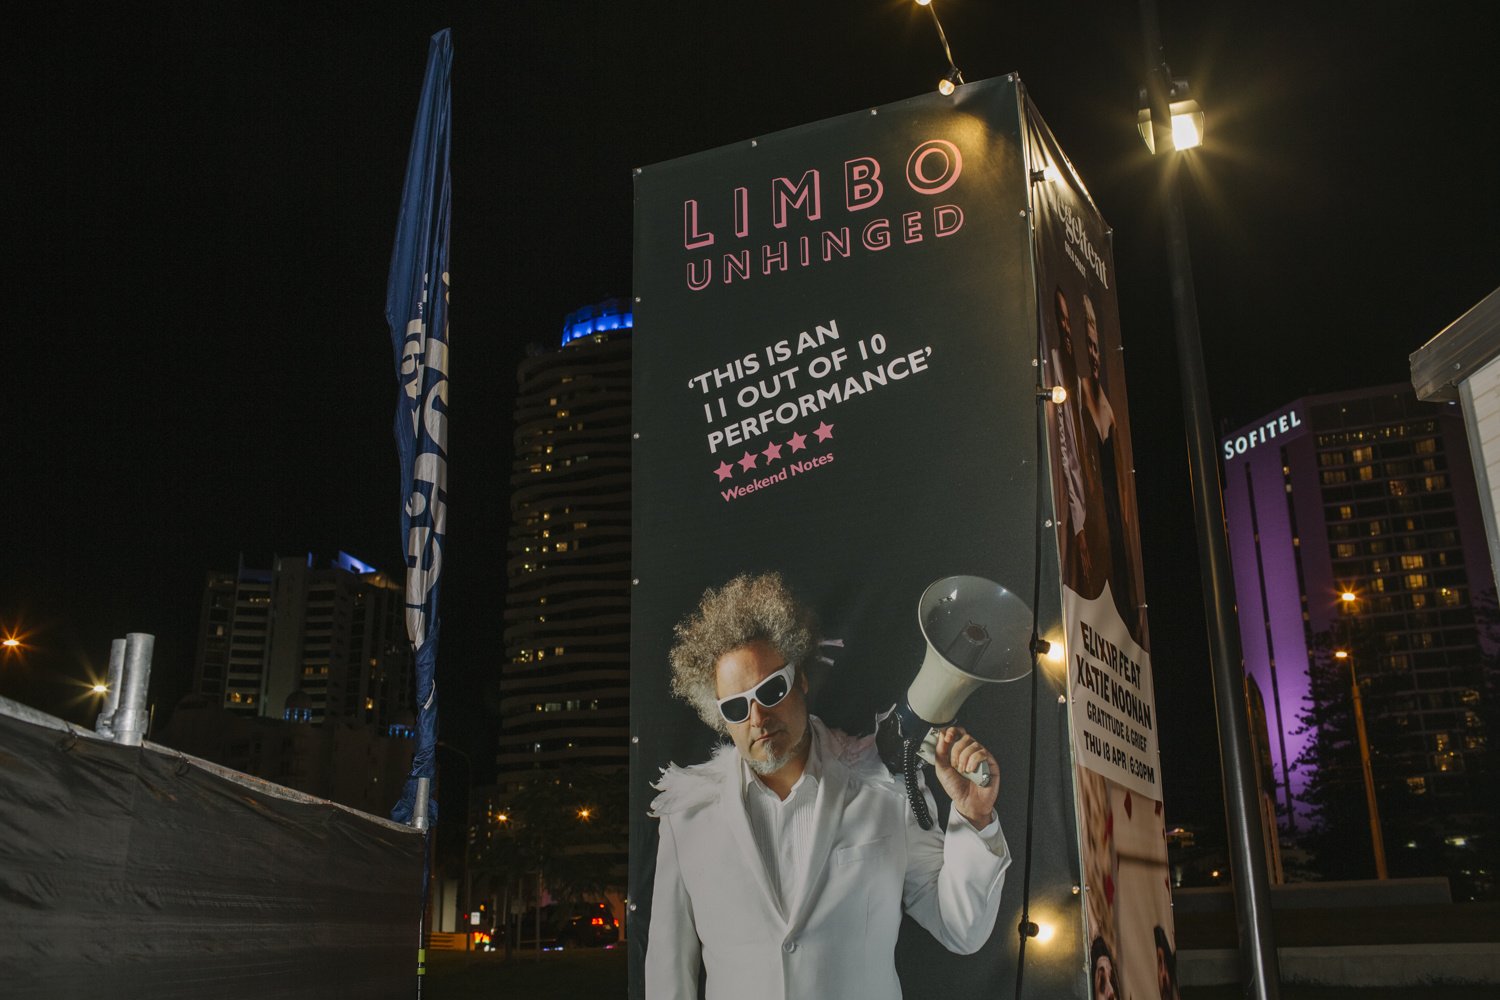 LIMBO Unhinged at The Spiegeltent Gold Coast